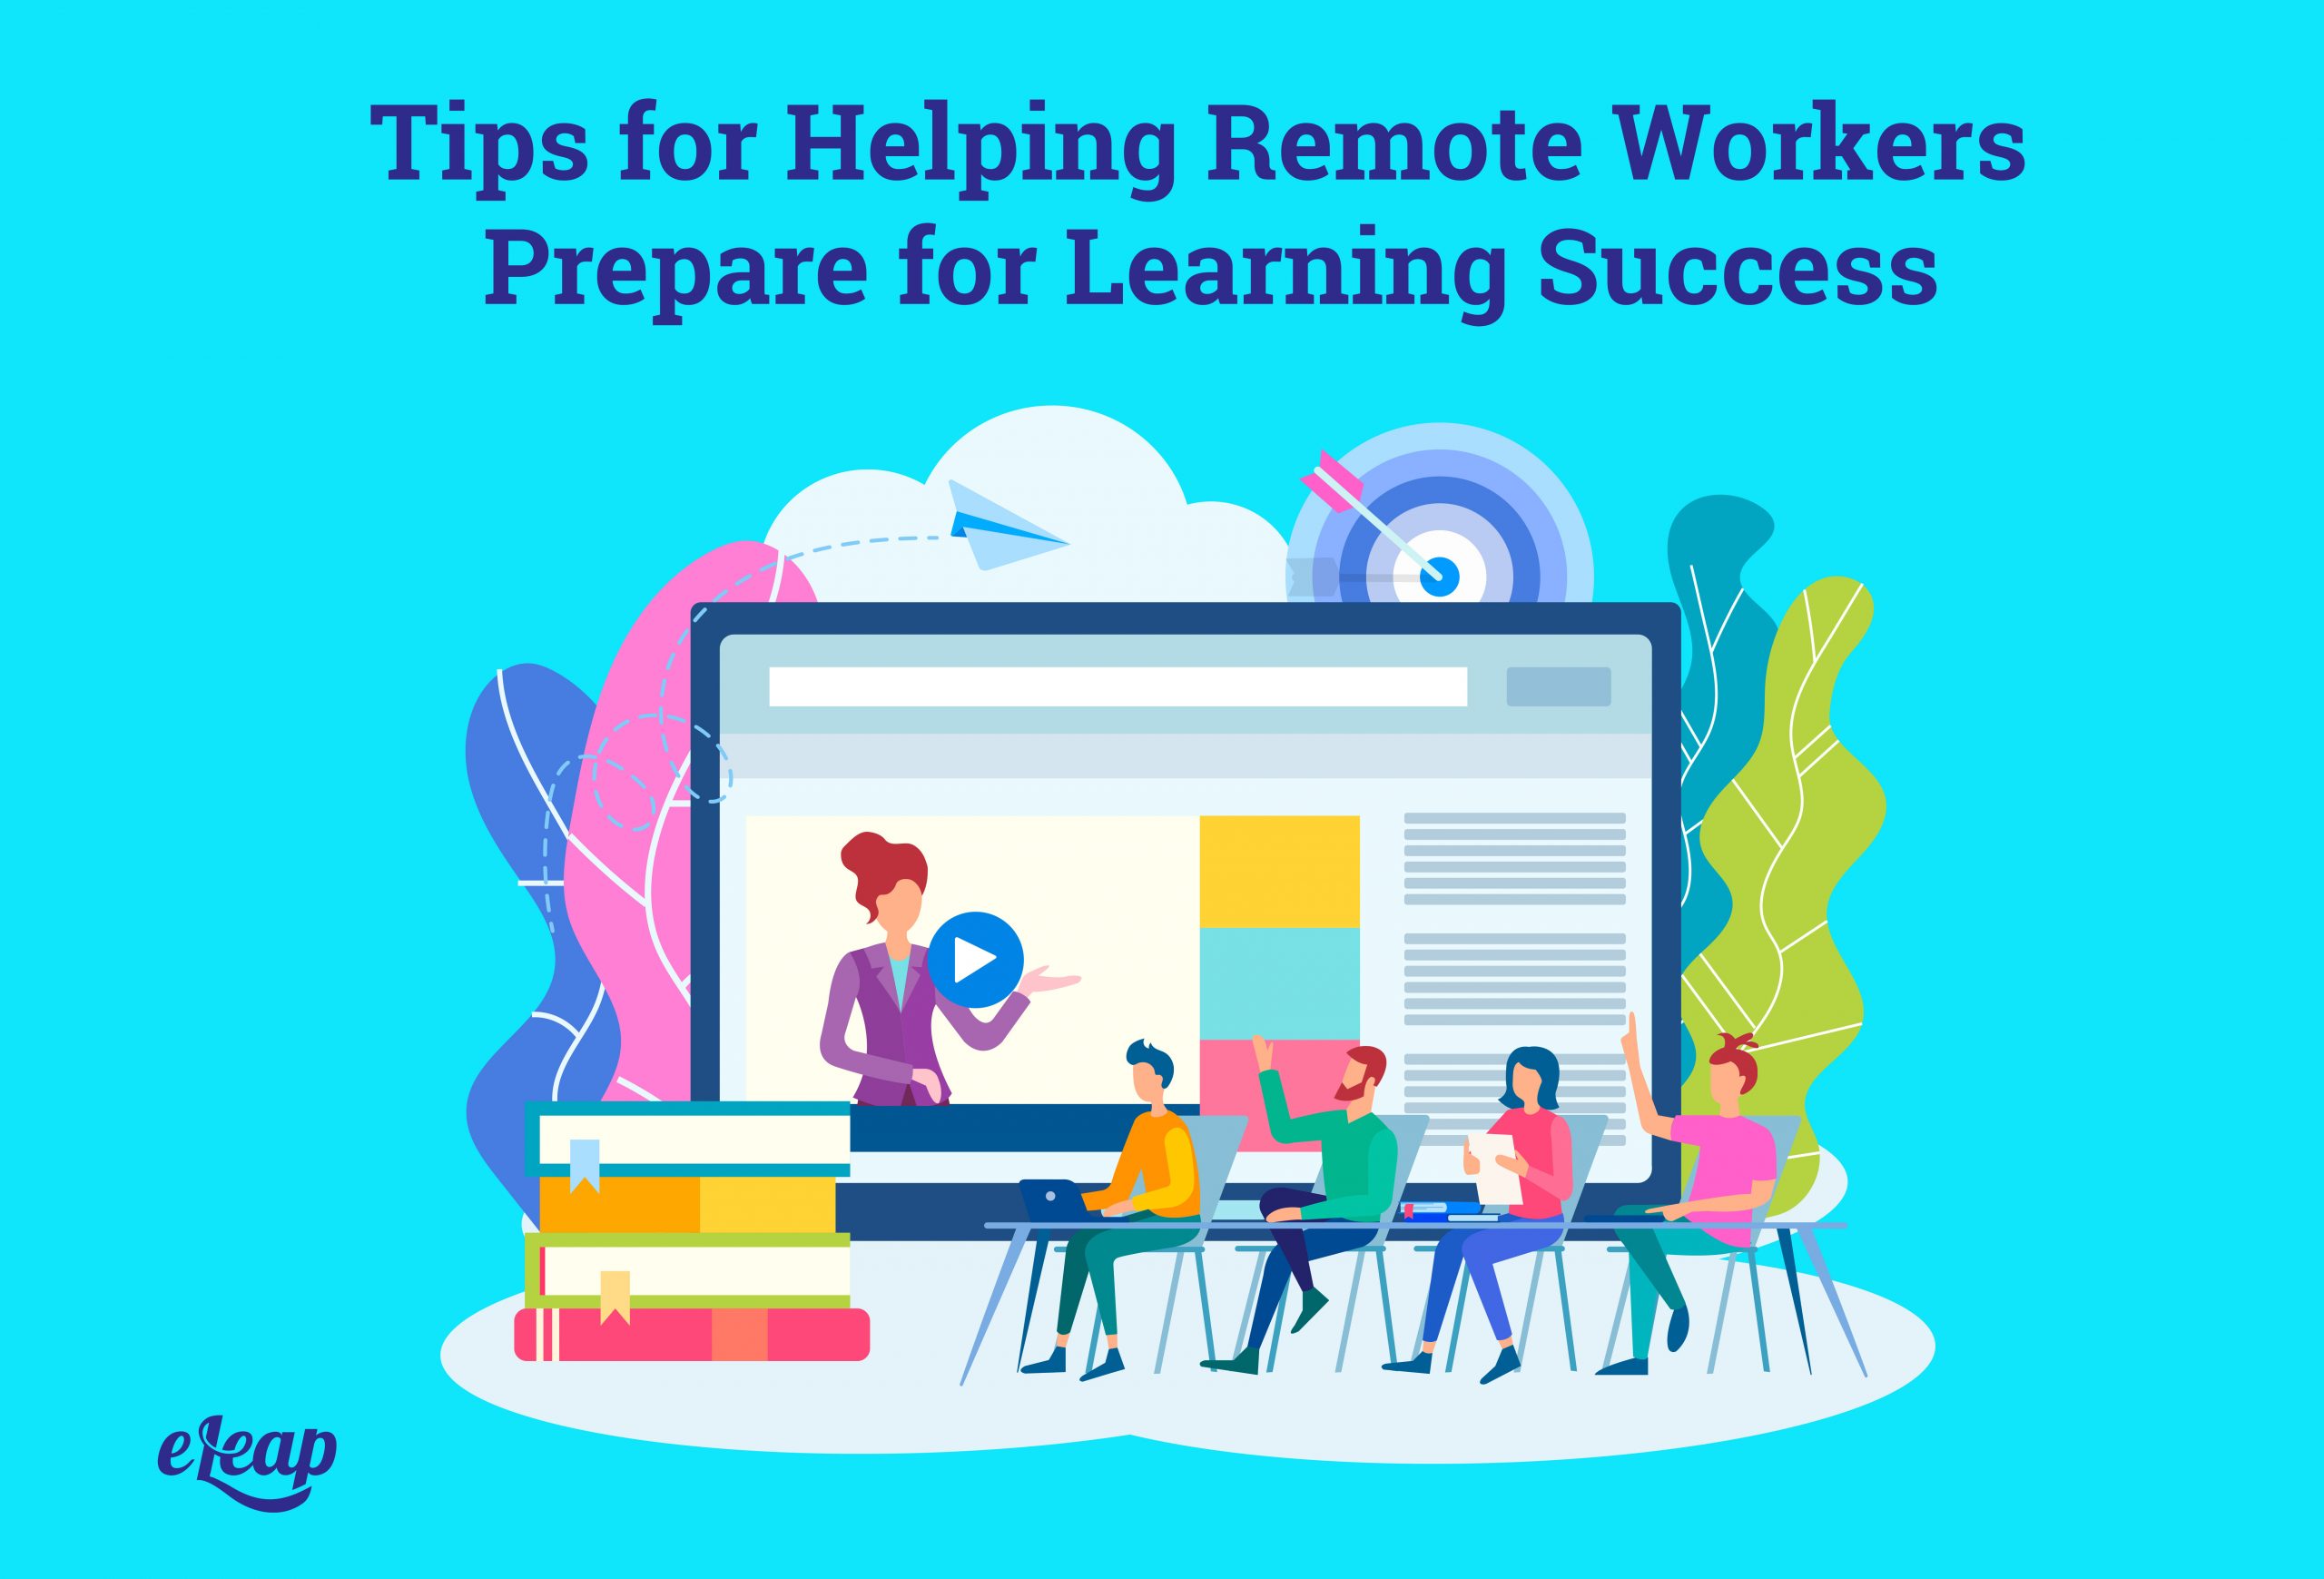 Tips for Helping Remote Workers Prepare for Learning Success